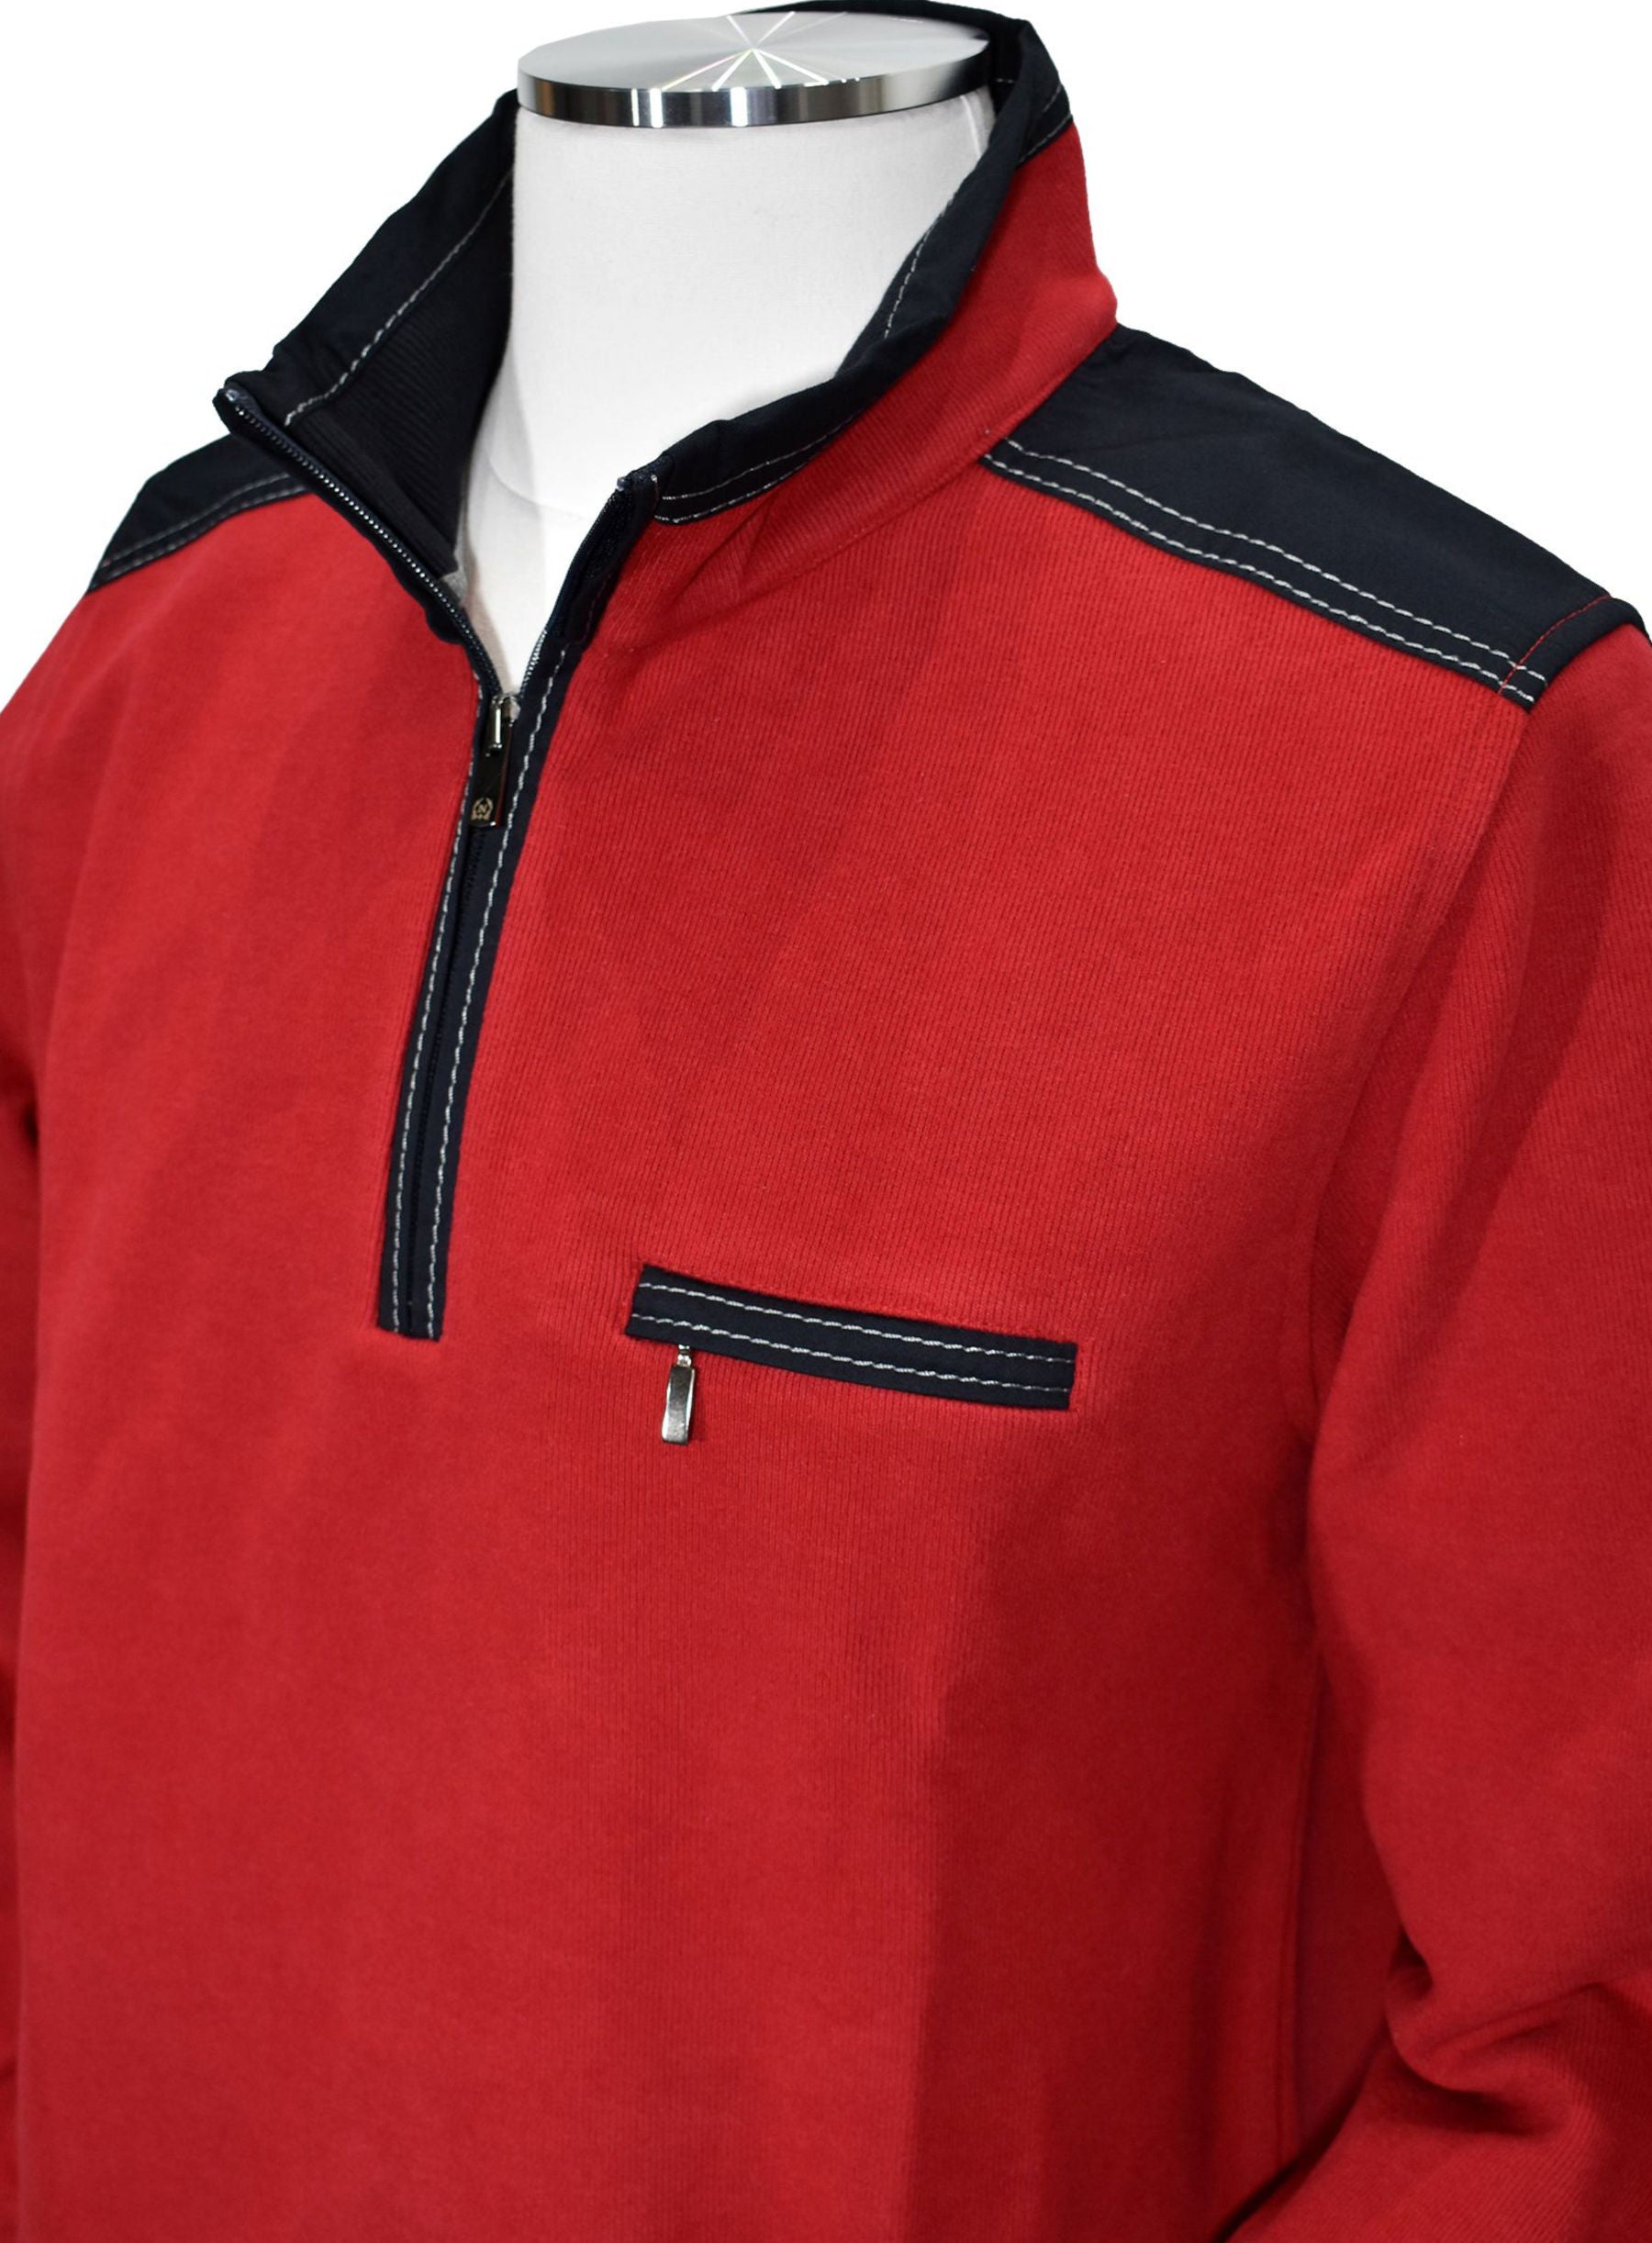 Cotton based fabric in a light to moderate weight, with contrast fabric detailing, and further accented with contrast stitching.   Great for an active lifestyle or just the image of an active or nautical lifestyle.   Soft mock neck model for added comfort with classic ribbed cuffs and waist band.  Classic fit.  Red color, by Marcello Sport.